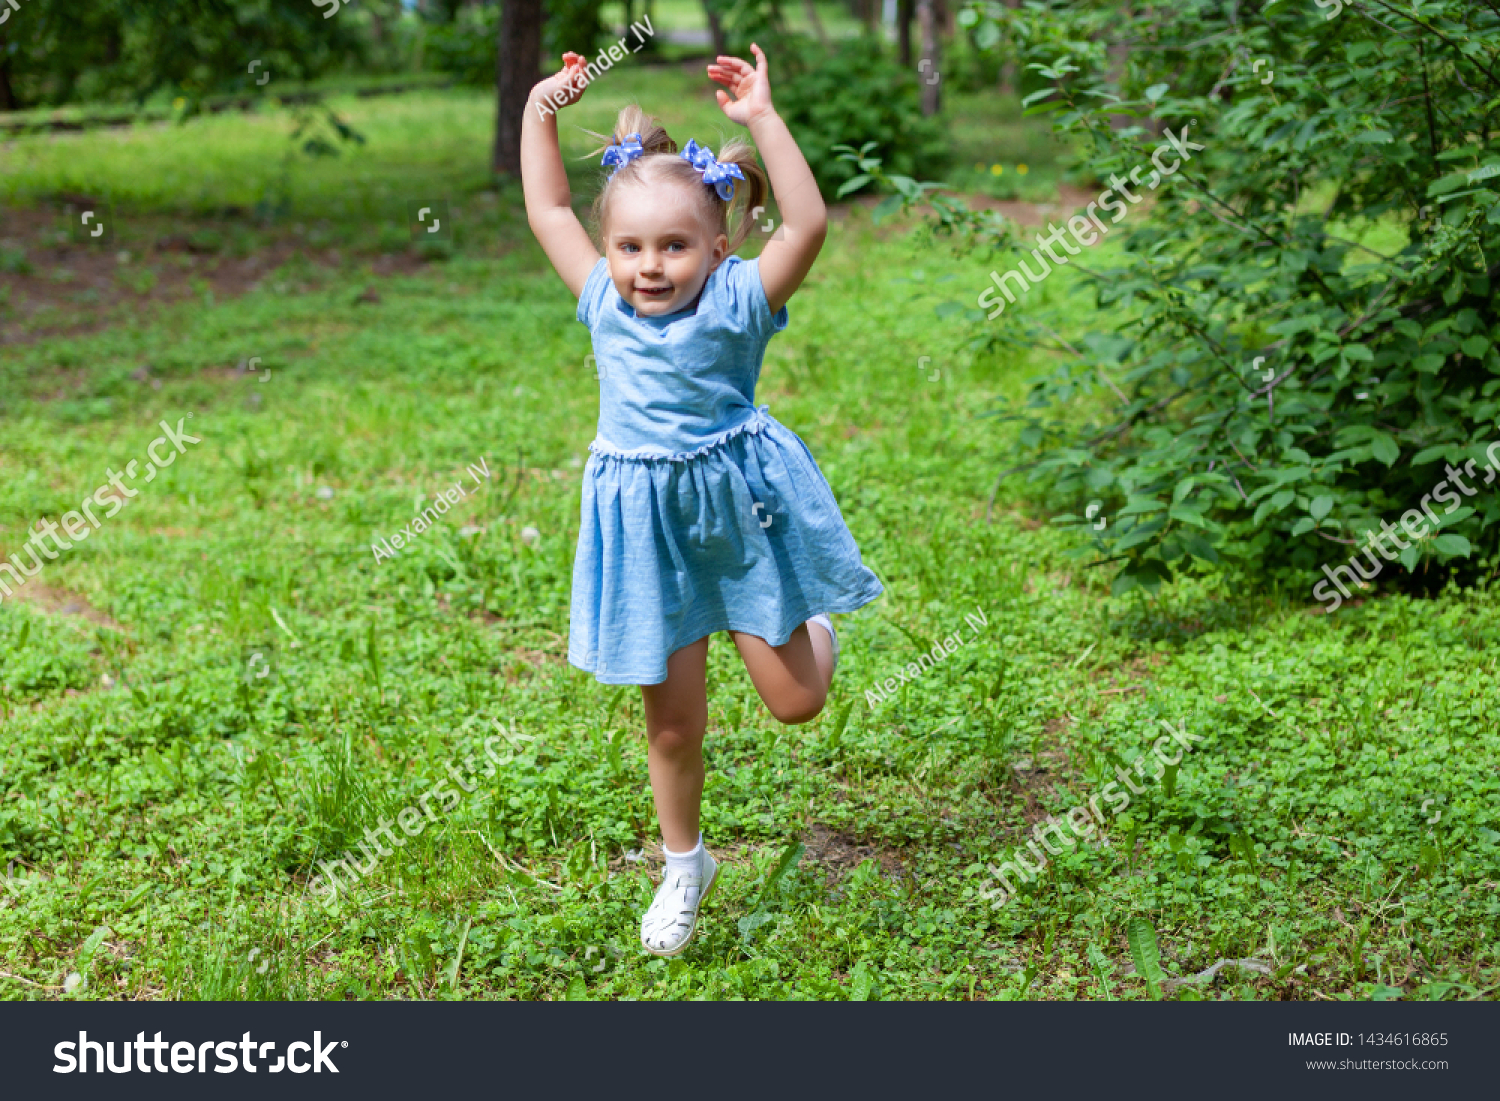 little cheerful girl on a walk in the park #1434616865